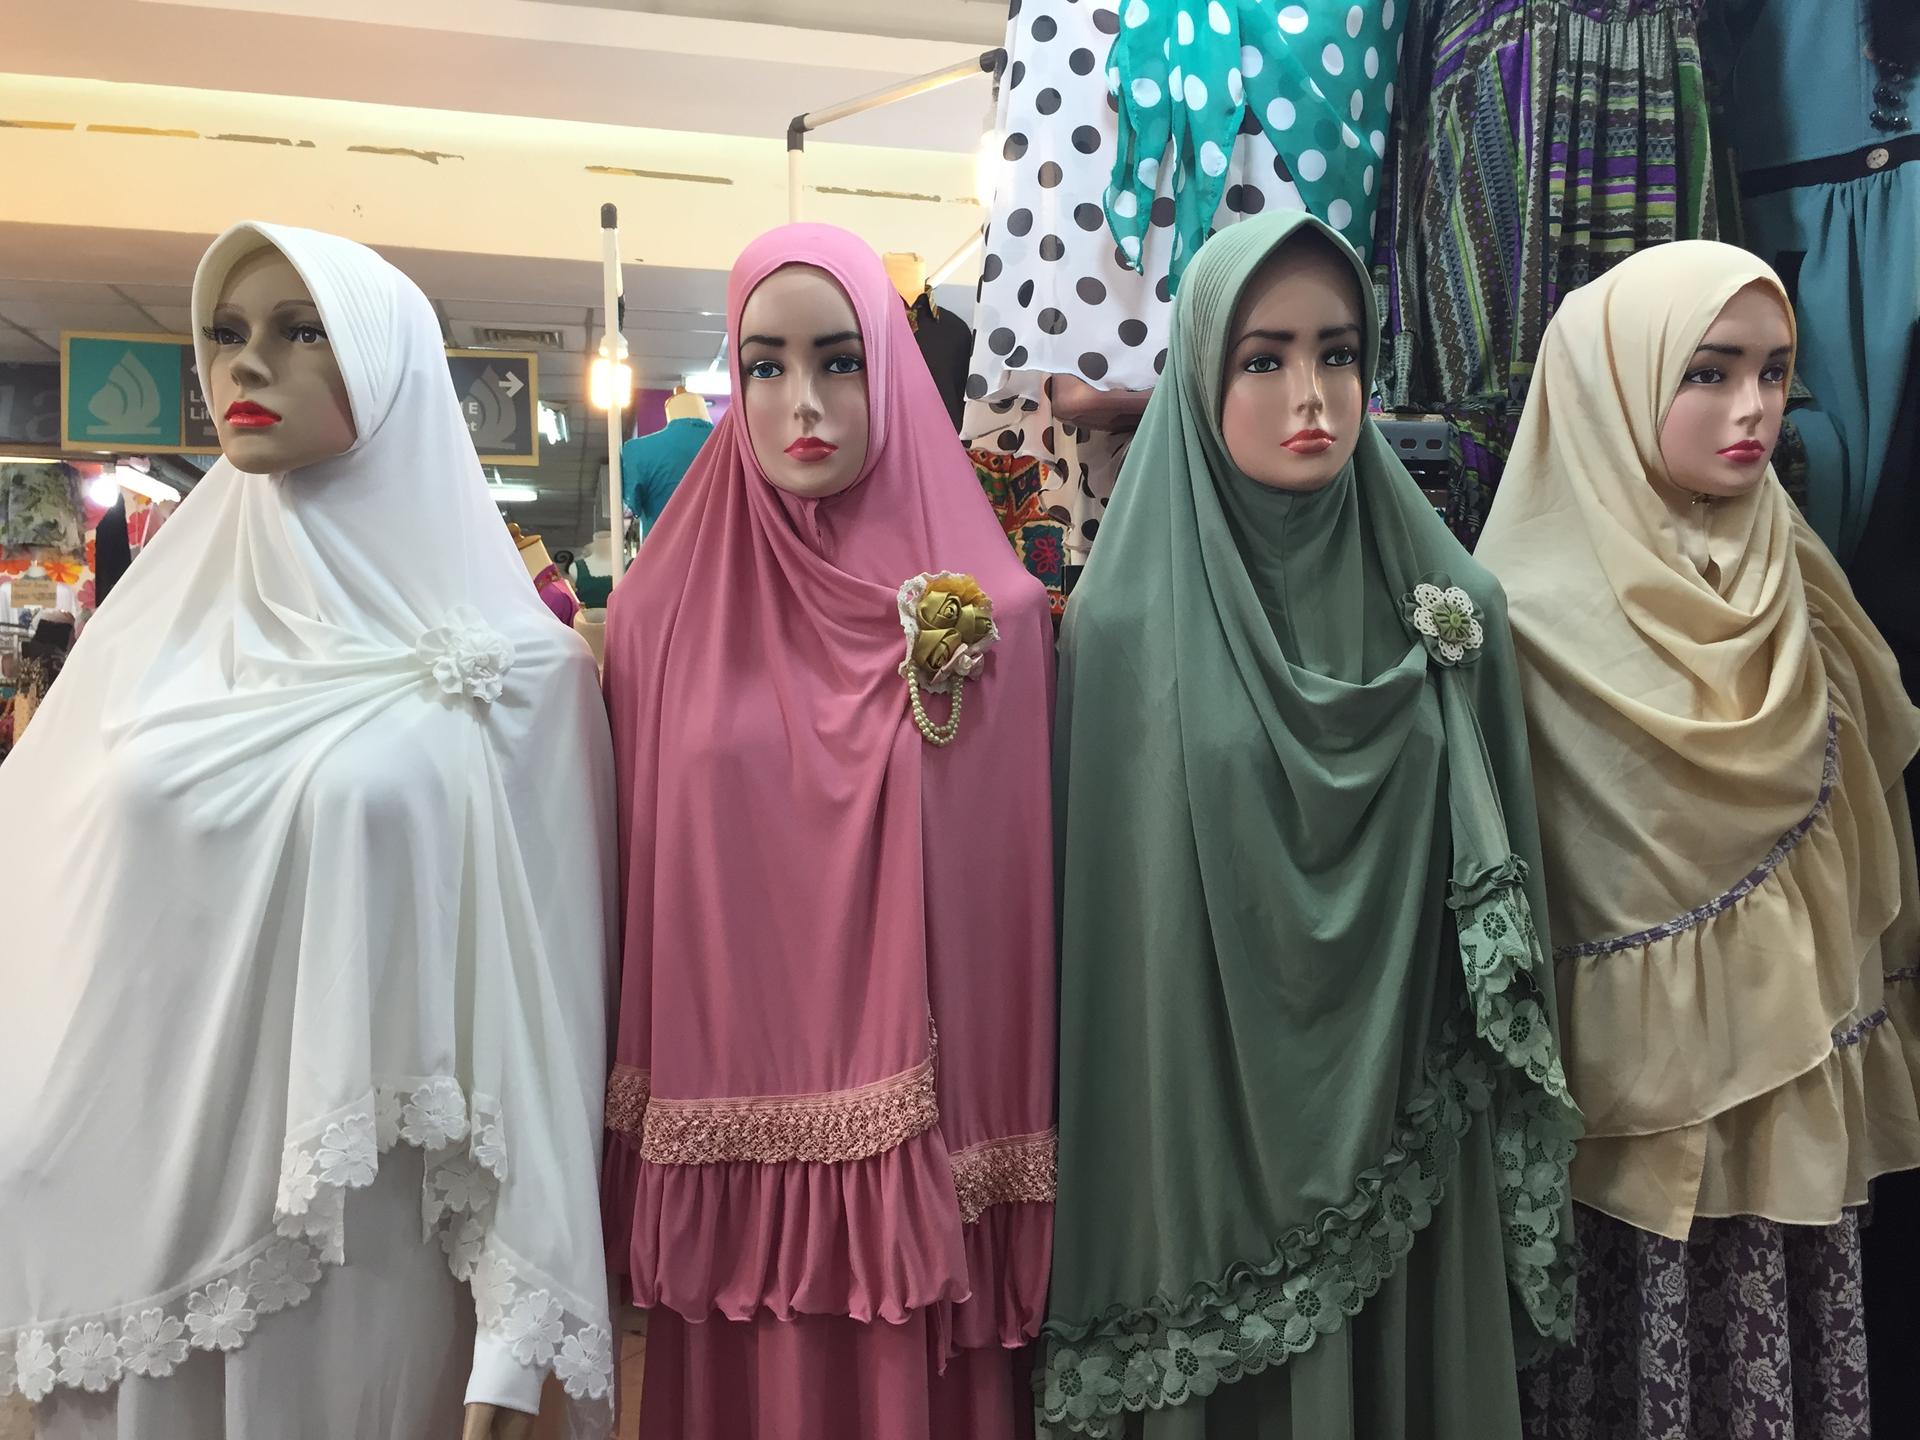 Shopping at Thamrin City, a Jakarta mall that features Muslim apparel.